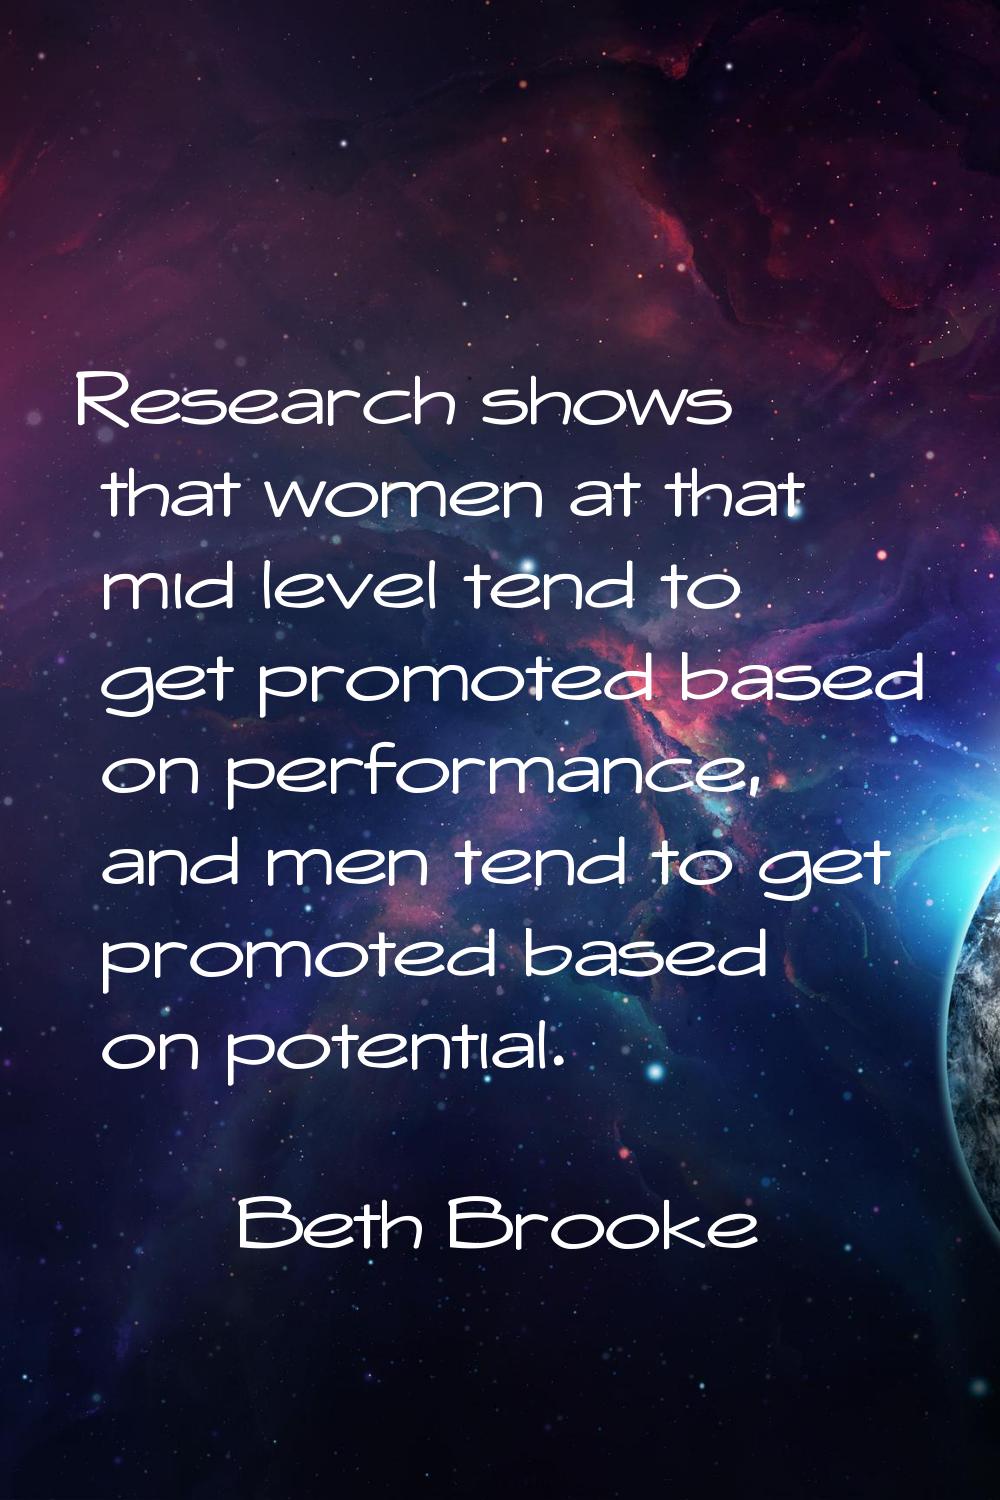 Research shows that women at that mid level tend to get promoted based on performance, and men tend